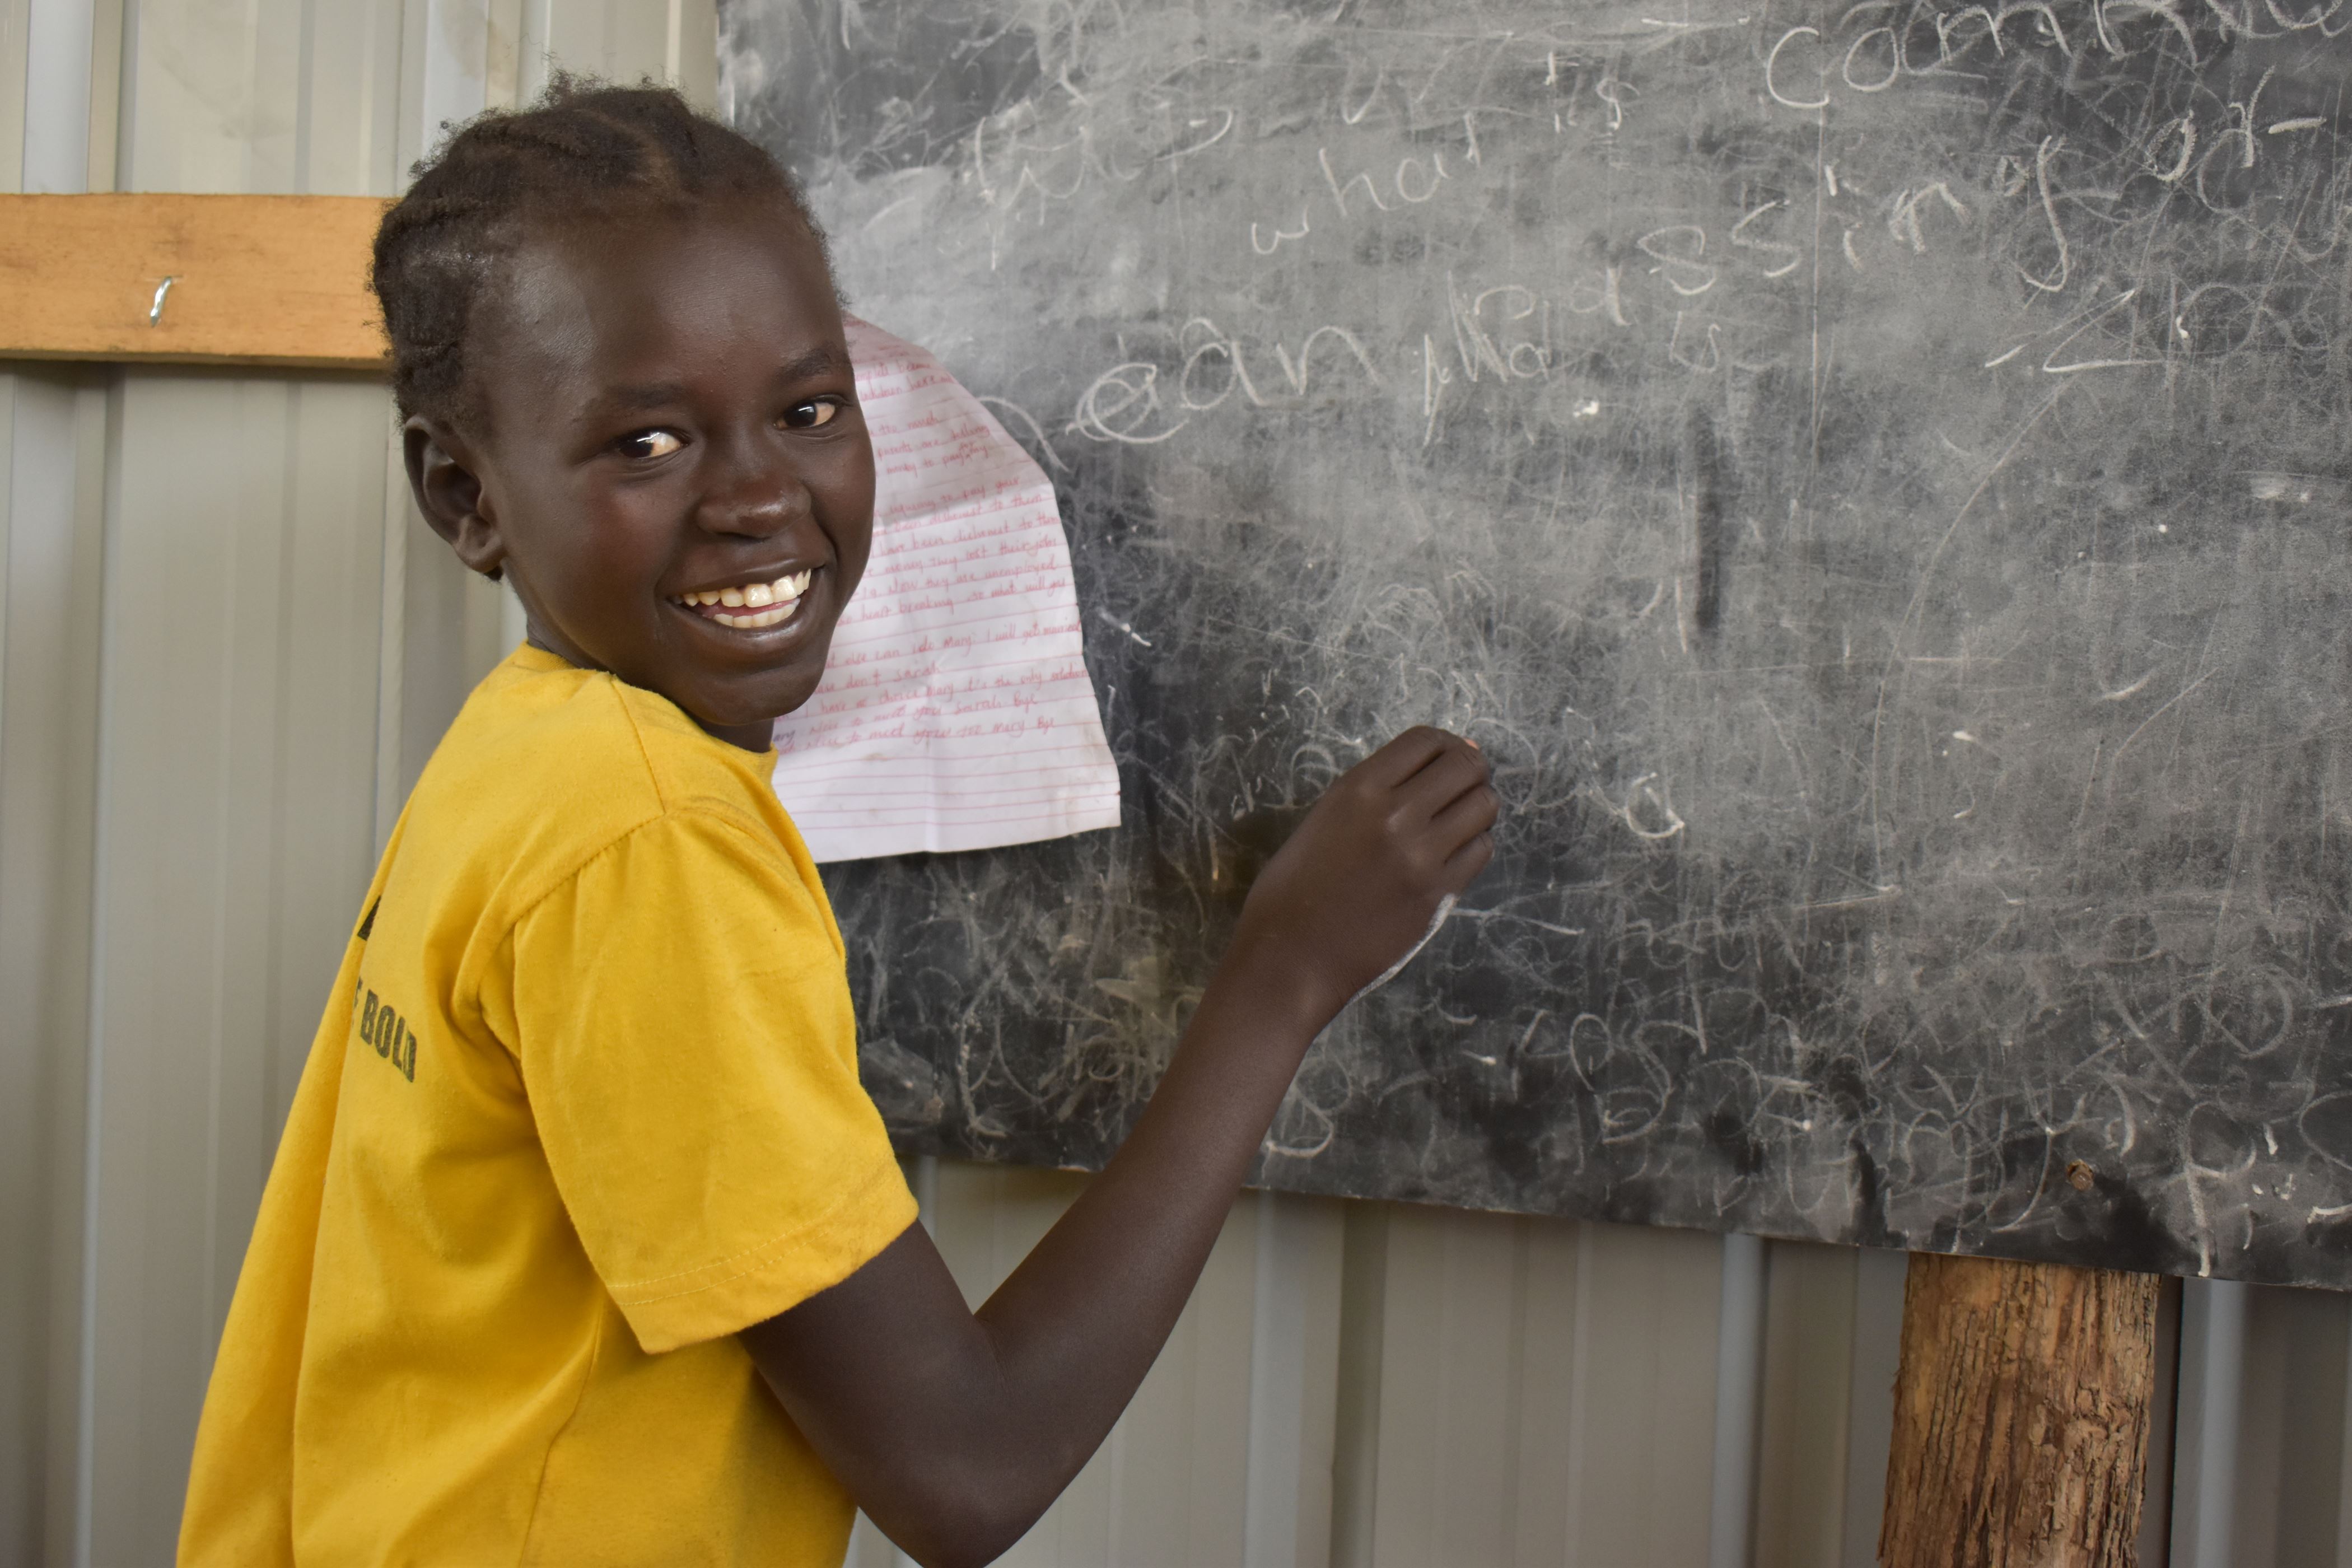 Yar a 14-year-old P.4 pupil in a classroom writing down questions for her friends on the chalkboard.